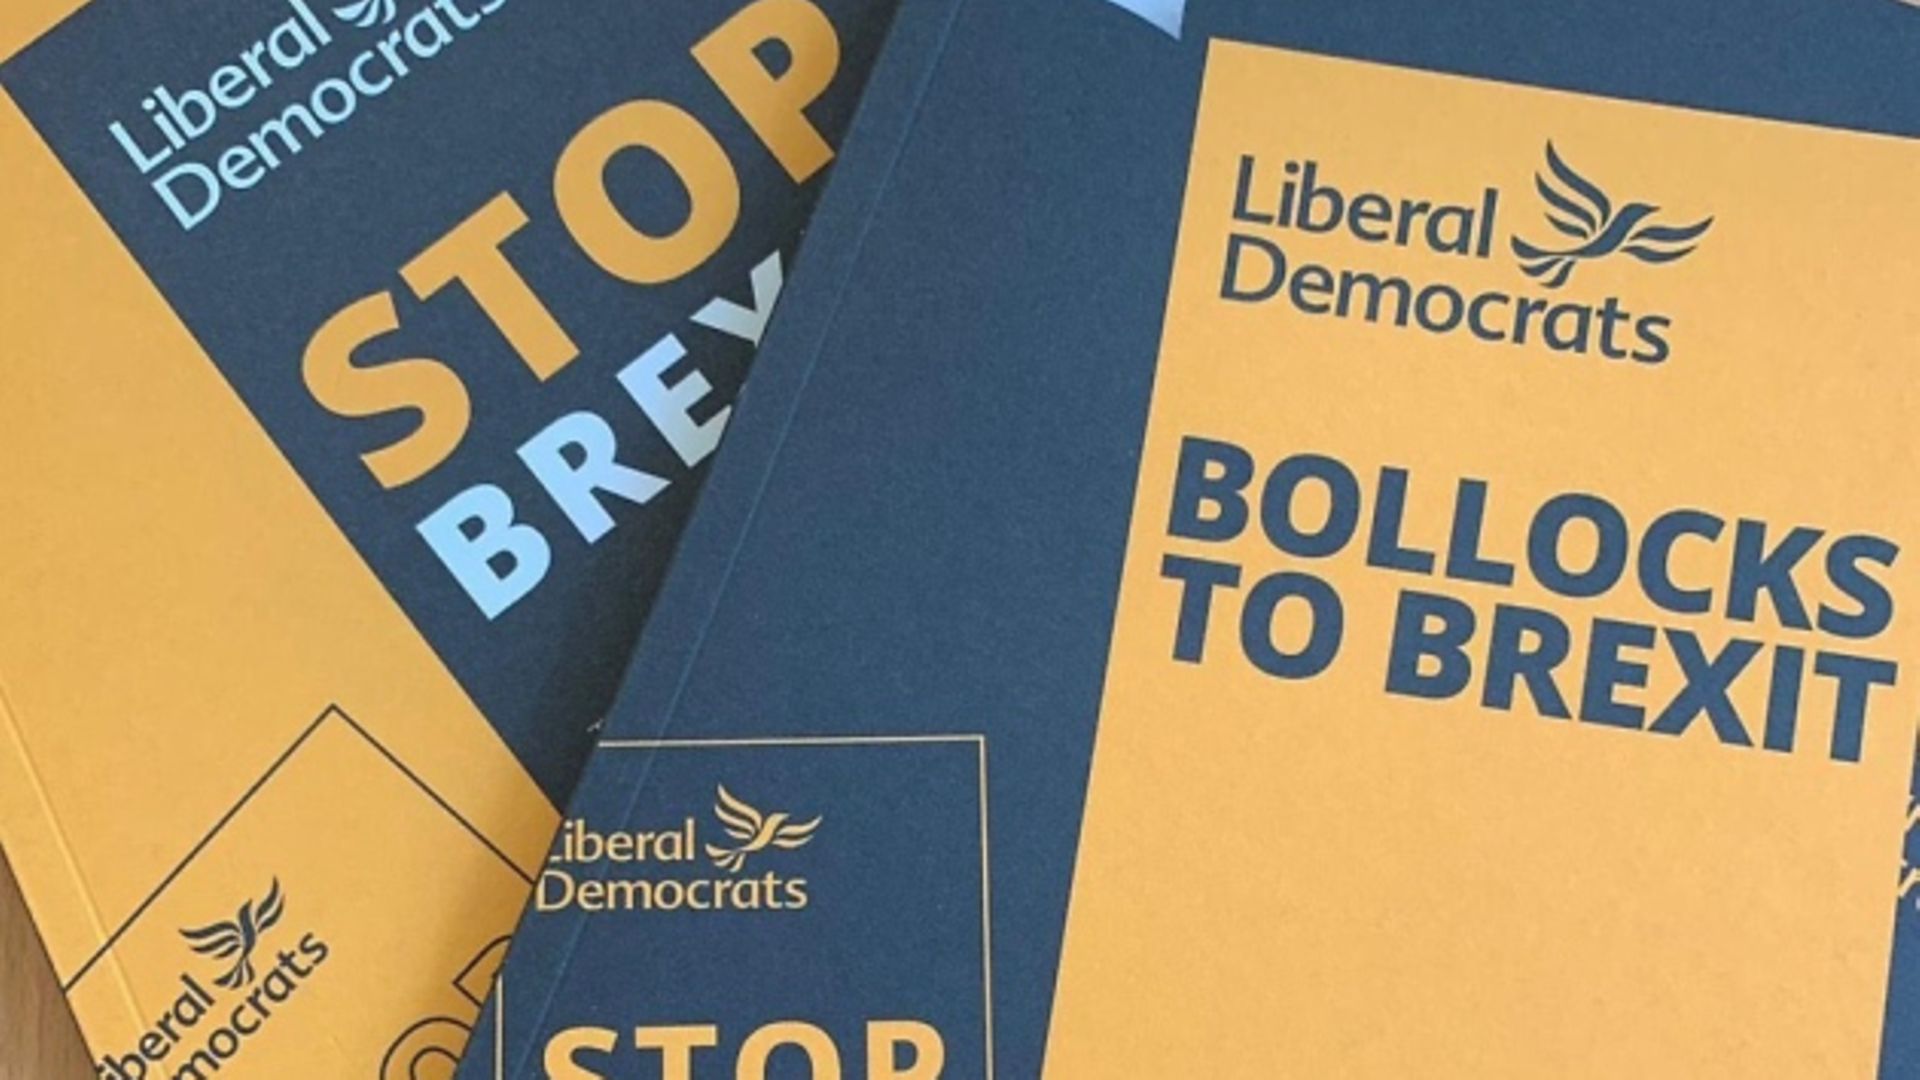 Lib Dems use 'Bollocks to Brexit' messaging. Photograph: Twitter.